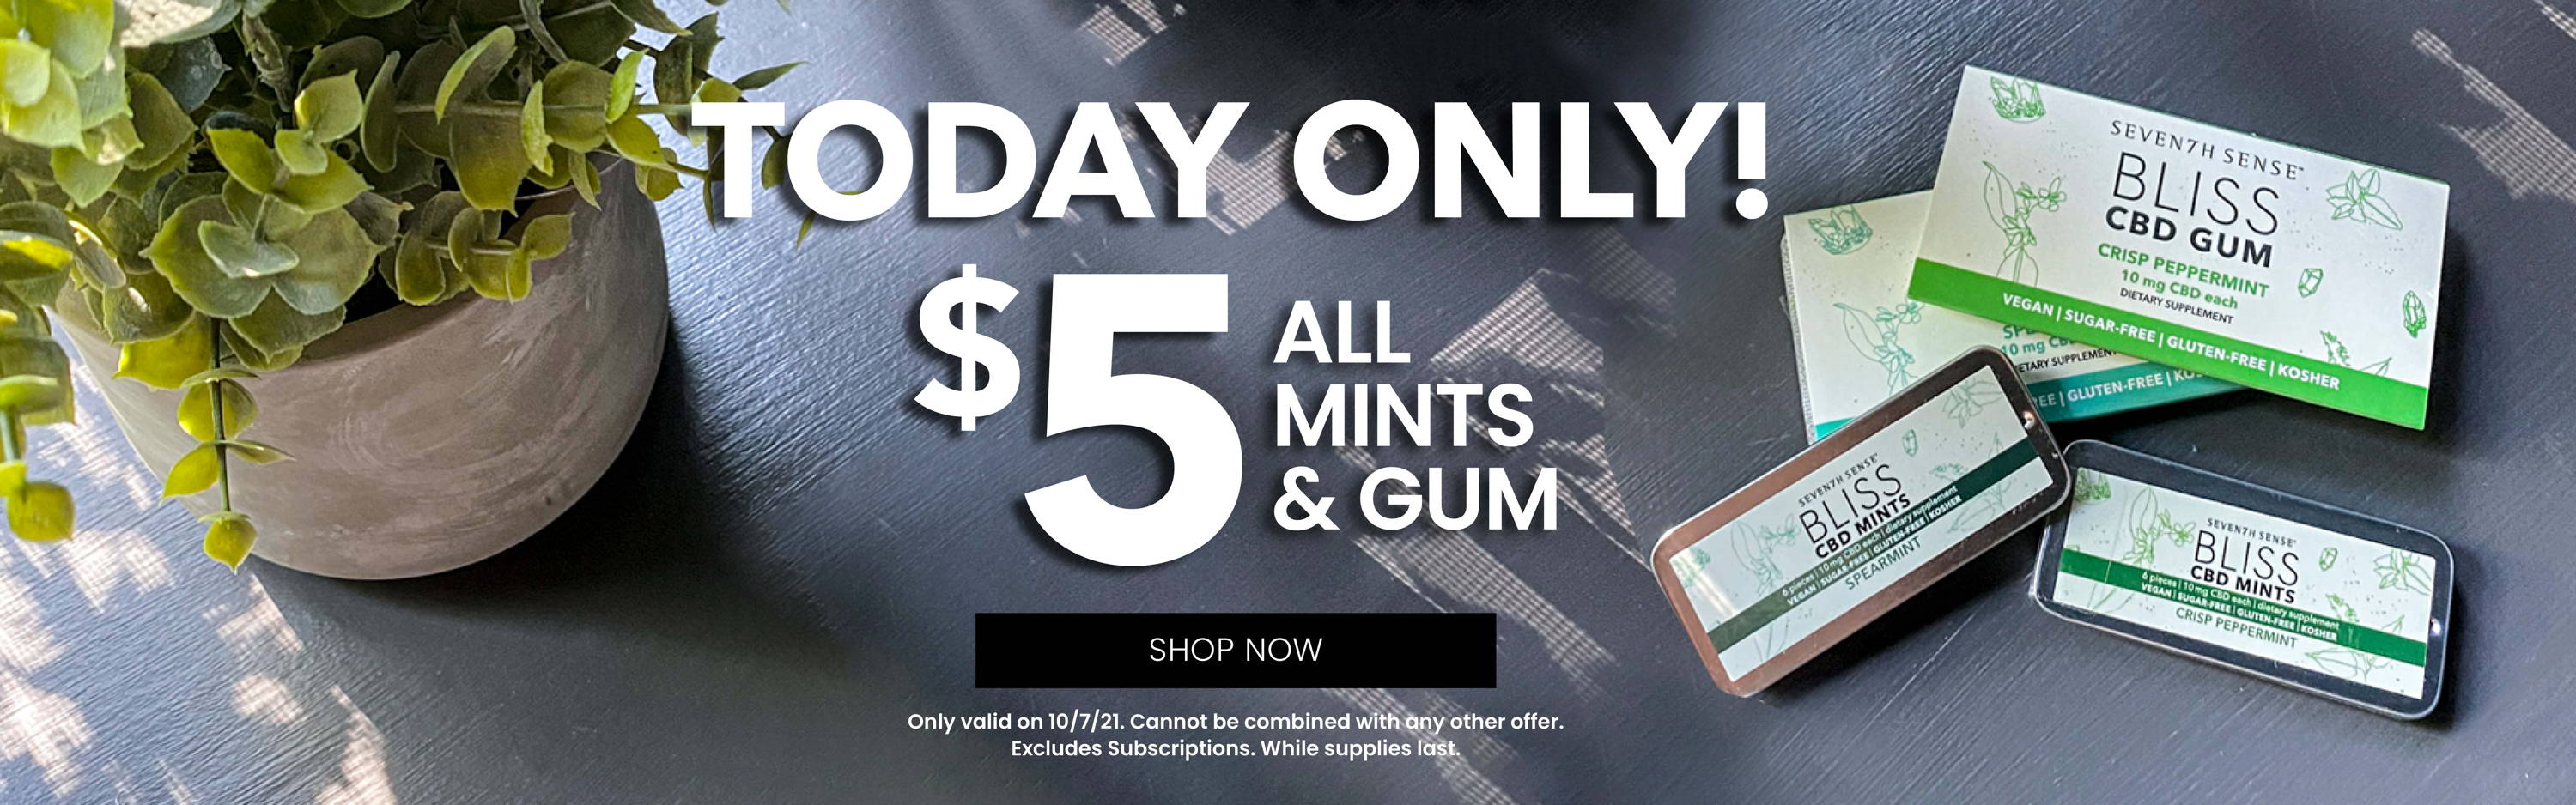 Today Only! 5 Dollar Gum and Mints